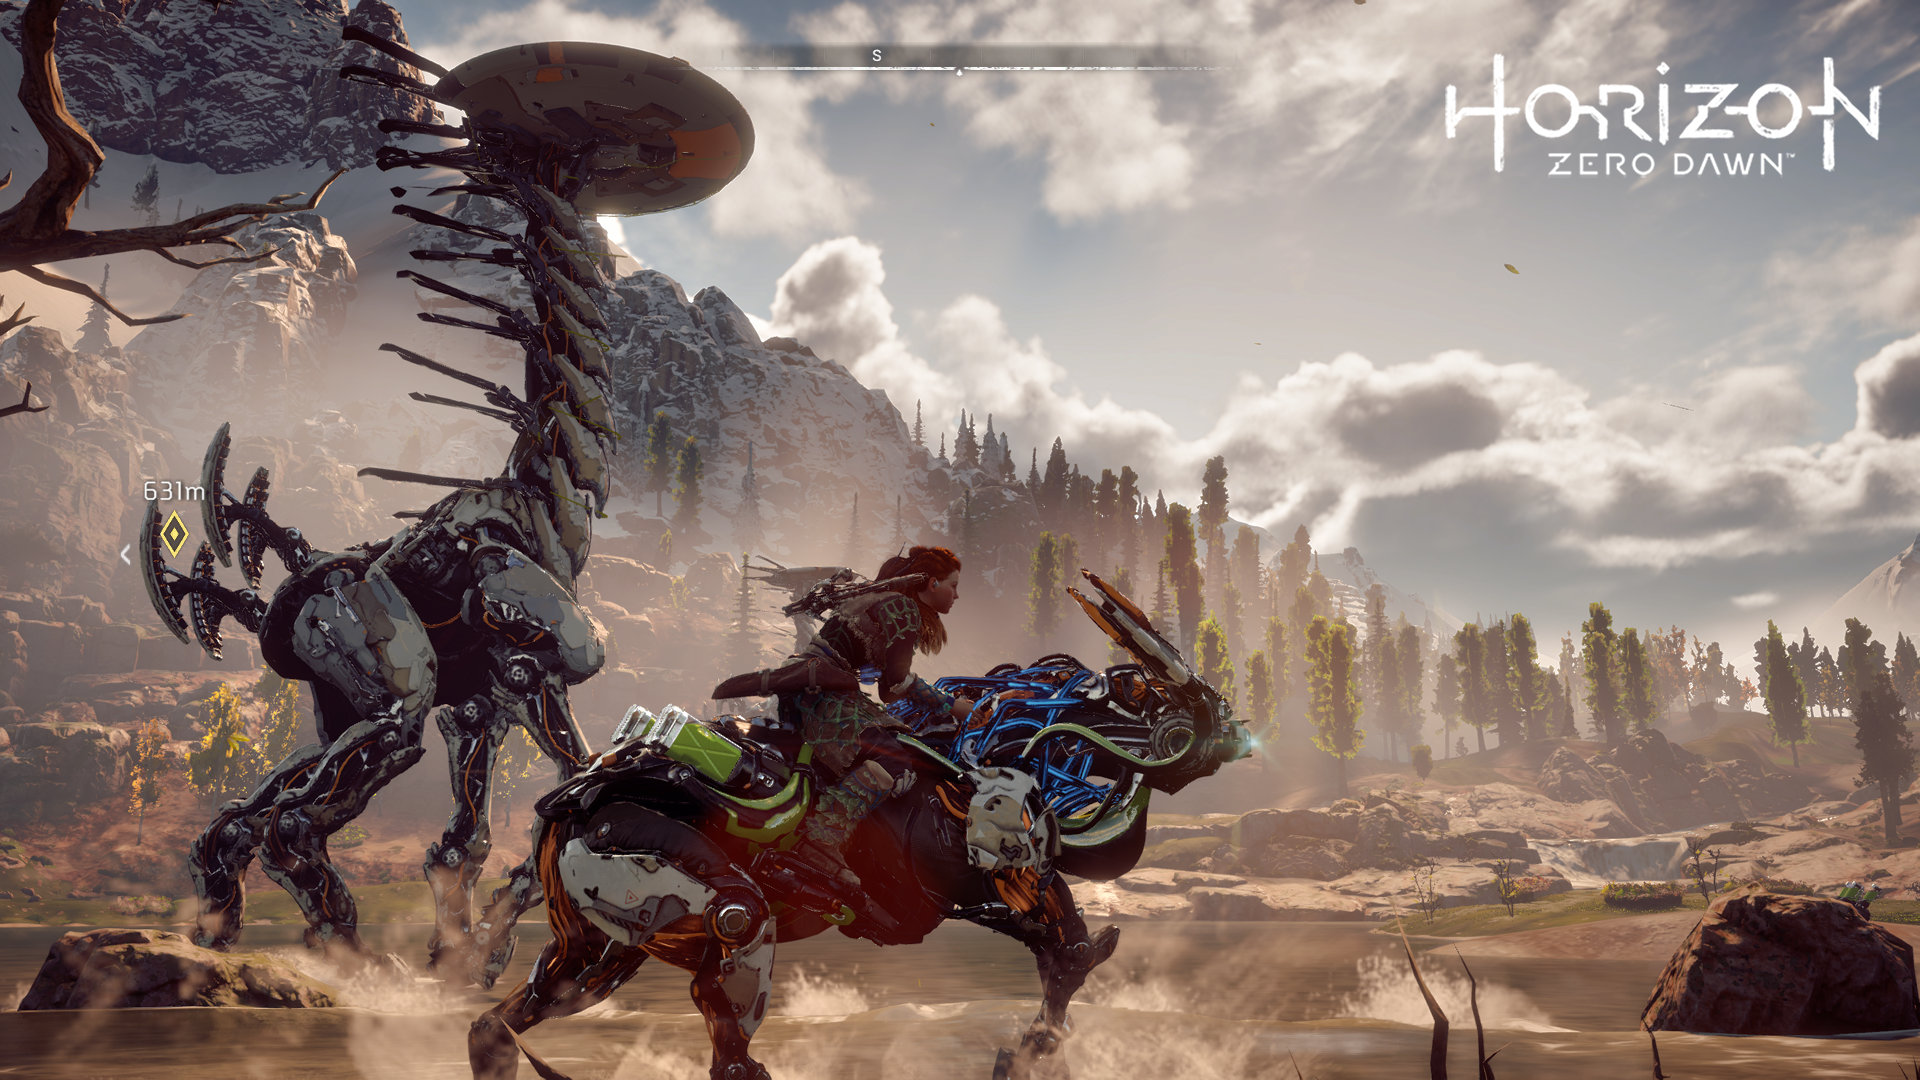 Horizon Forbidden West Complete Edition reportedly coming to PC